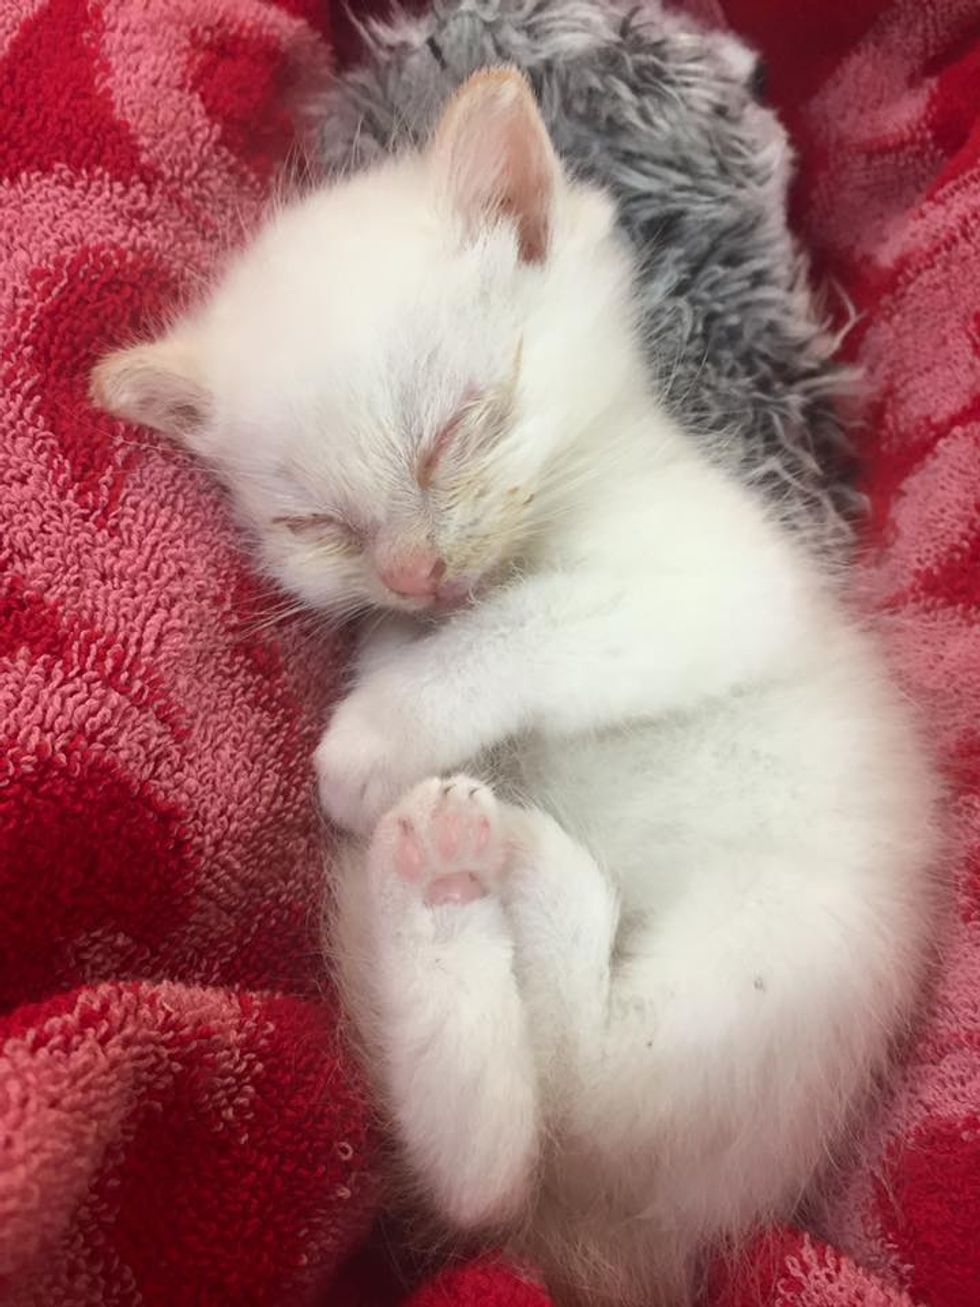 Tiny Kitten Rescued Off The Street Feels Love For The First Time The Difference In 2 Months